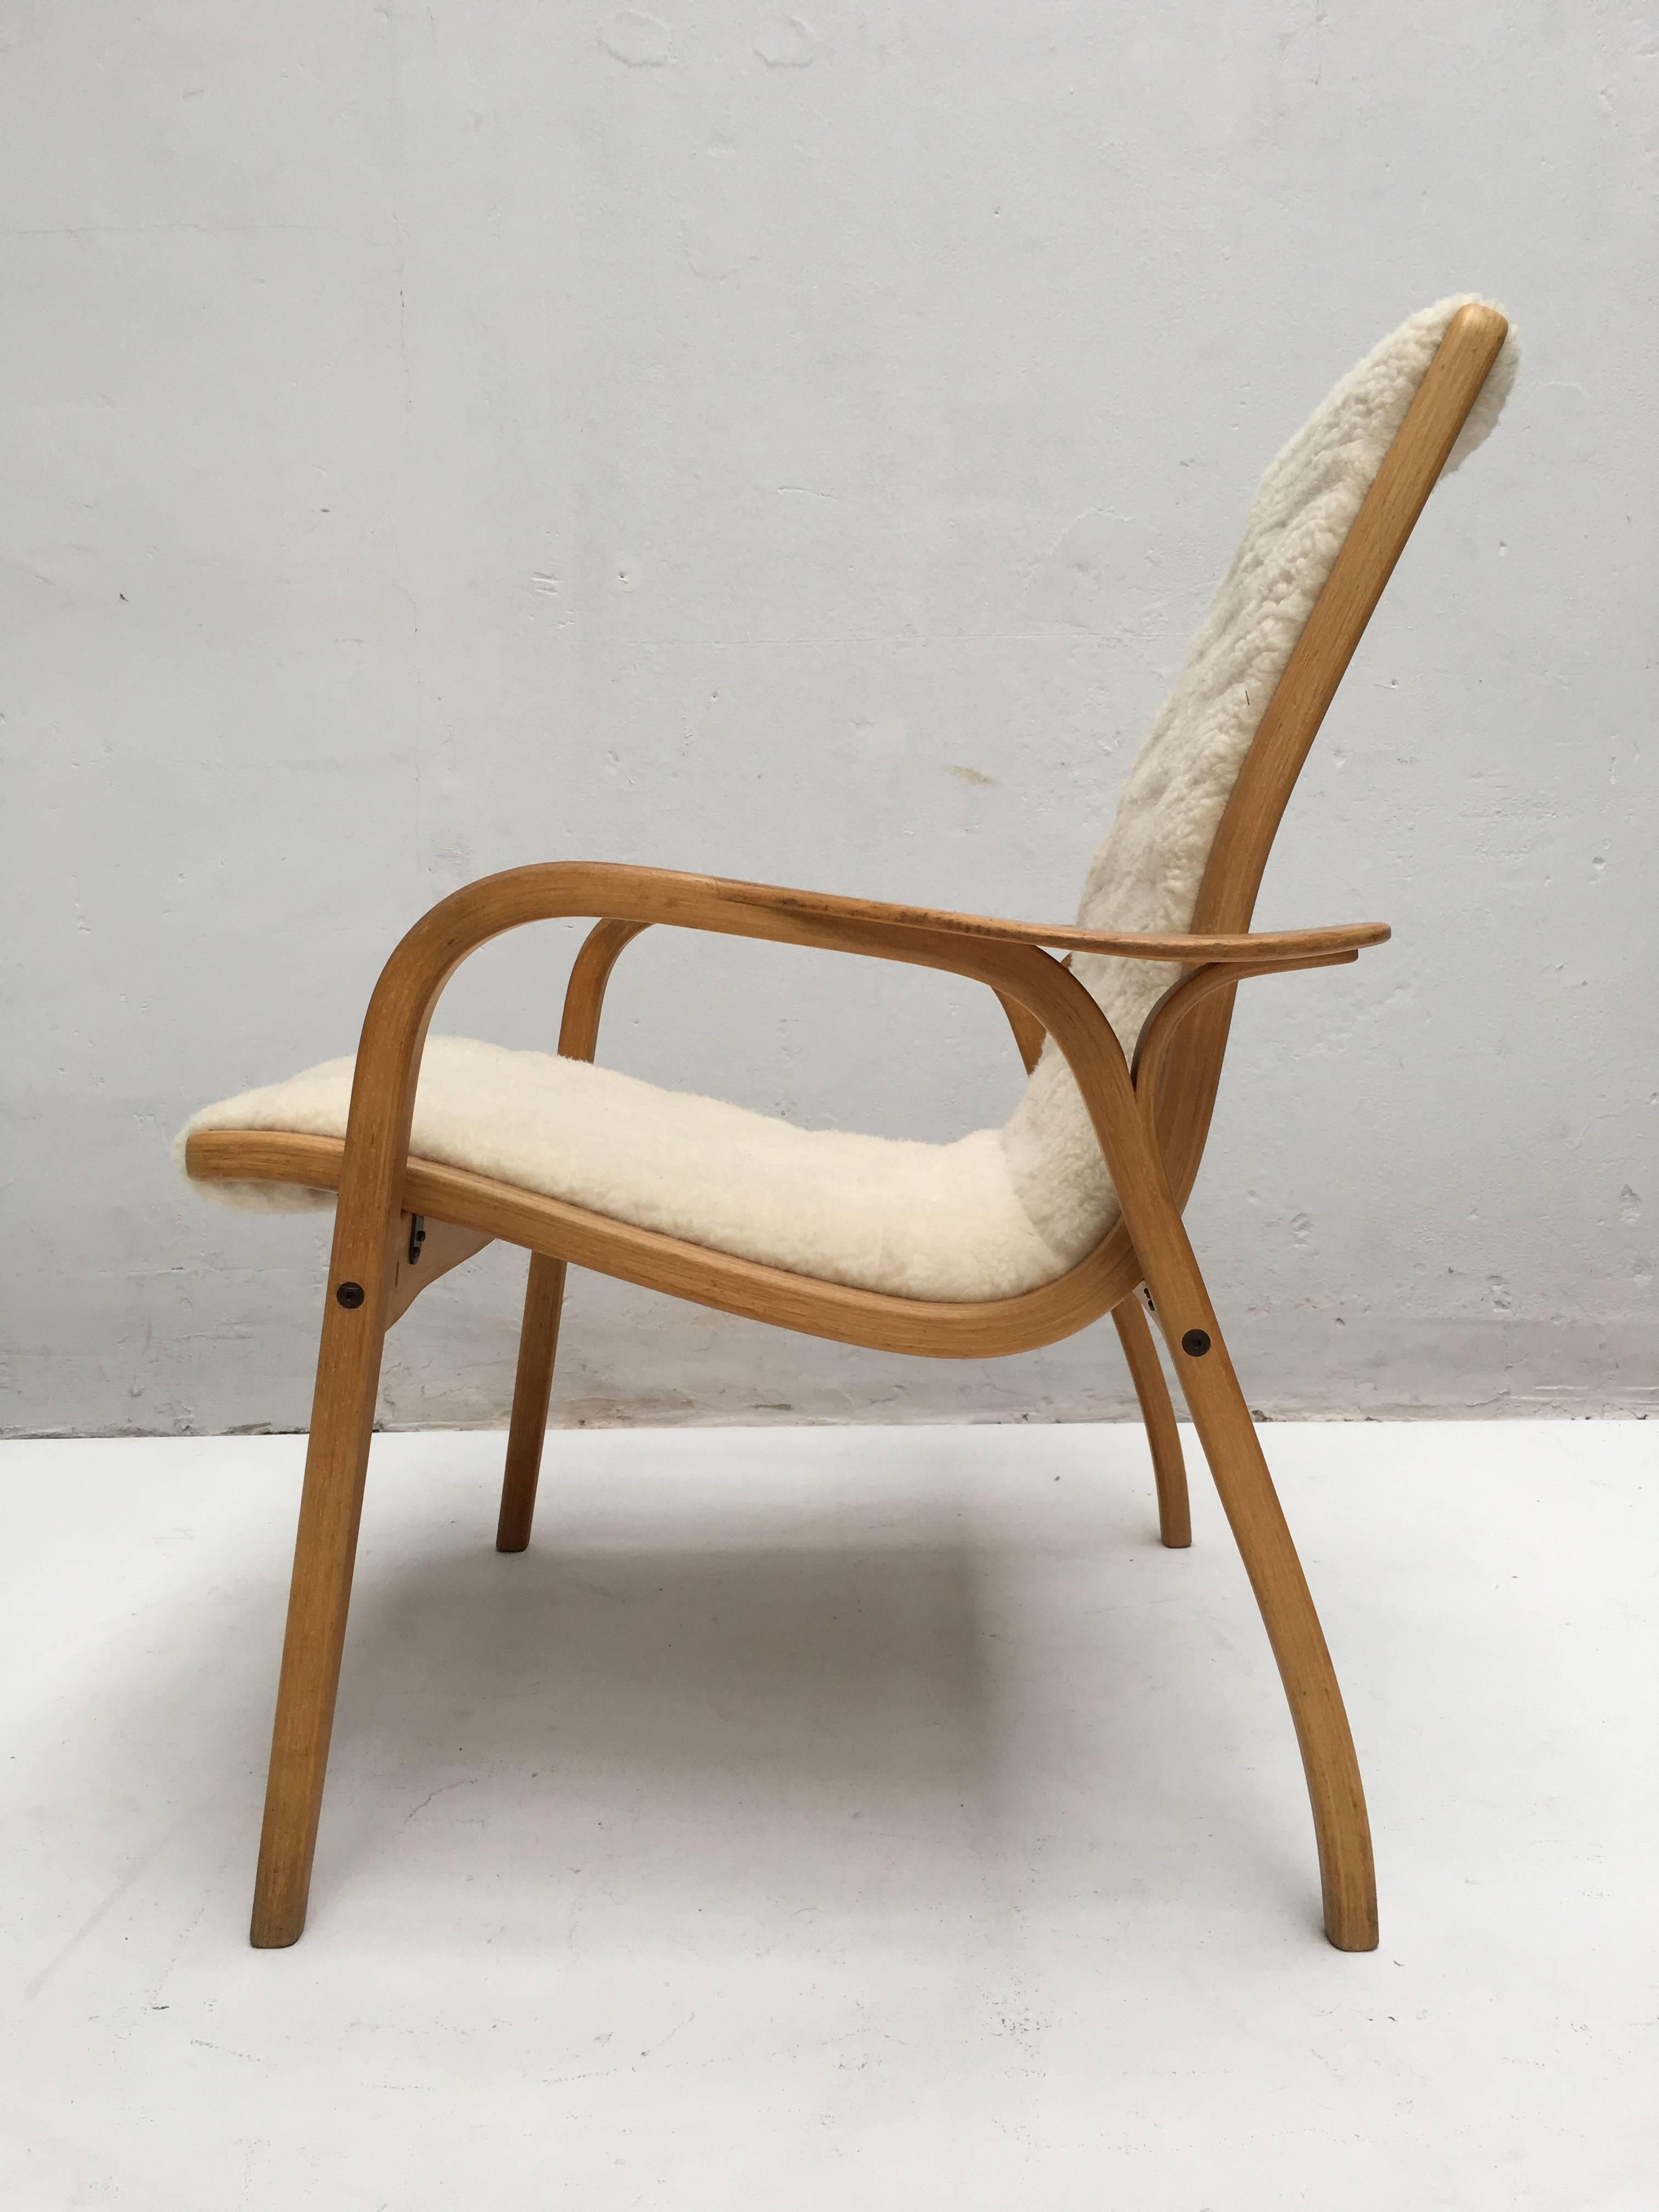 A lowback Lamino chair by Swedish designer Yngve Ekström for Swedese.

The original design for this famous chair was in 1956.

Laminated and bend birch plywood frame. 

This example is of later production, most likely late 1970s and has new